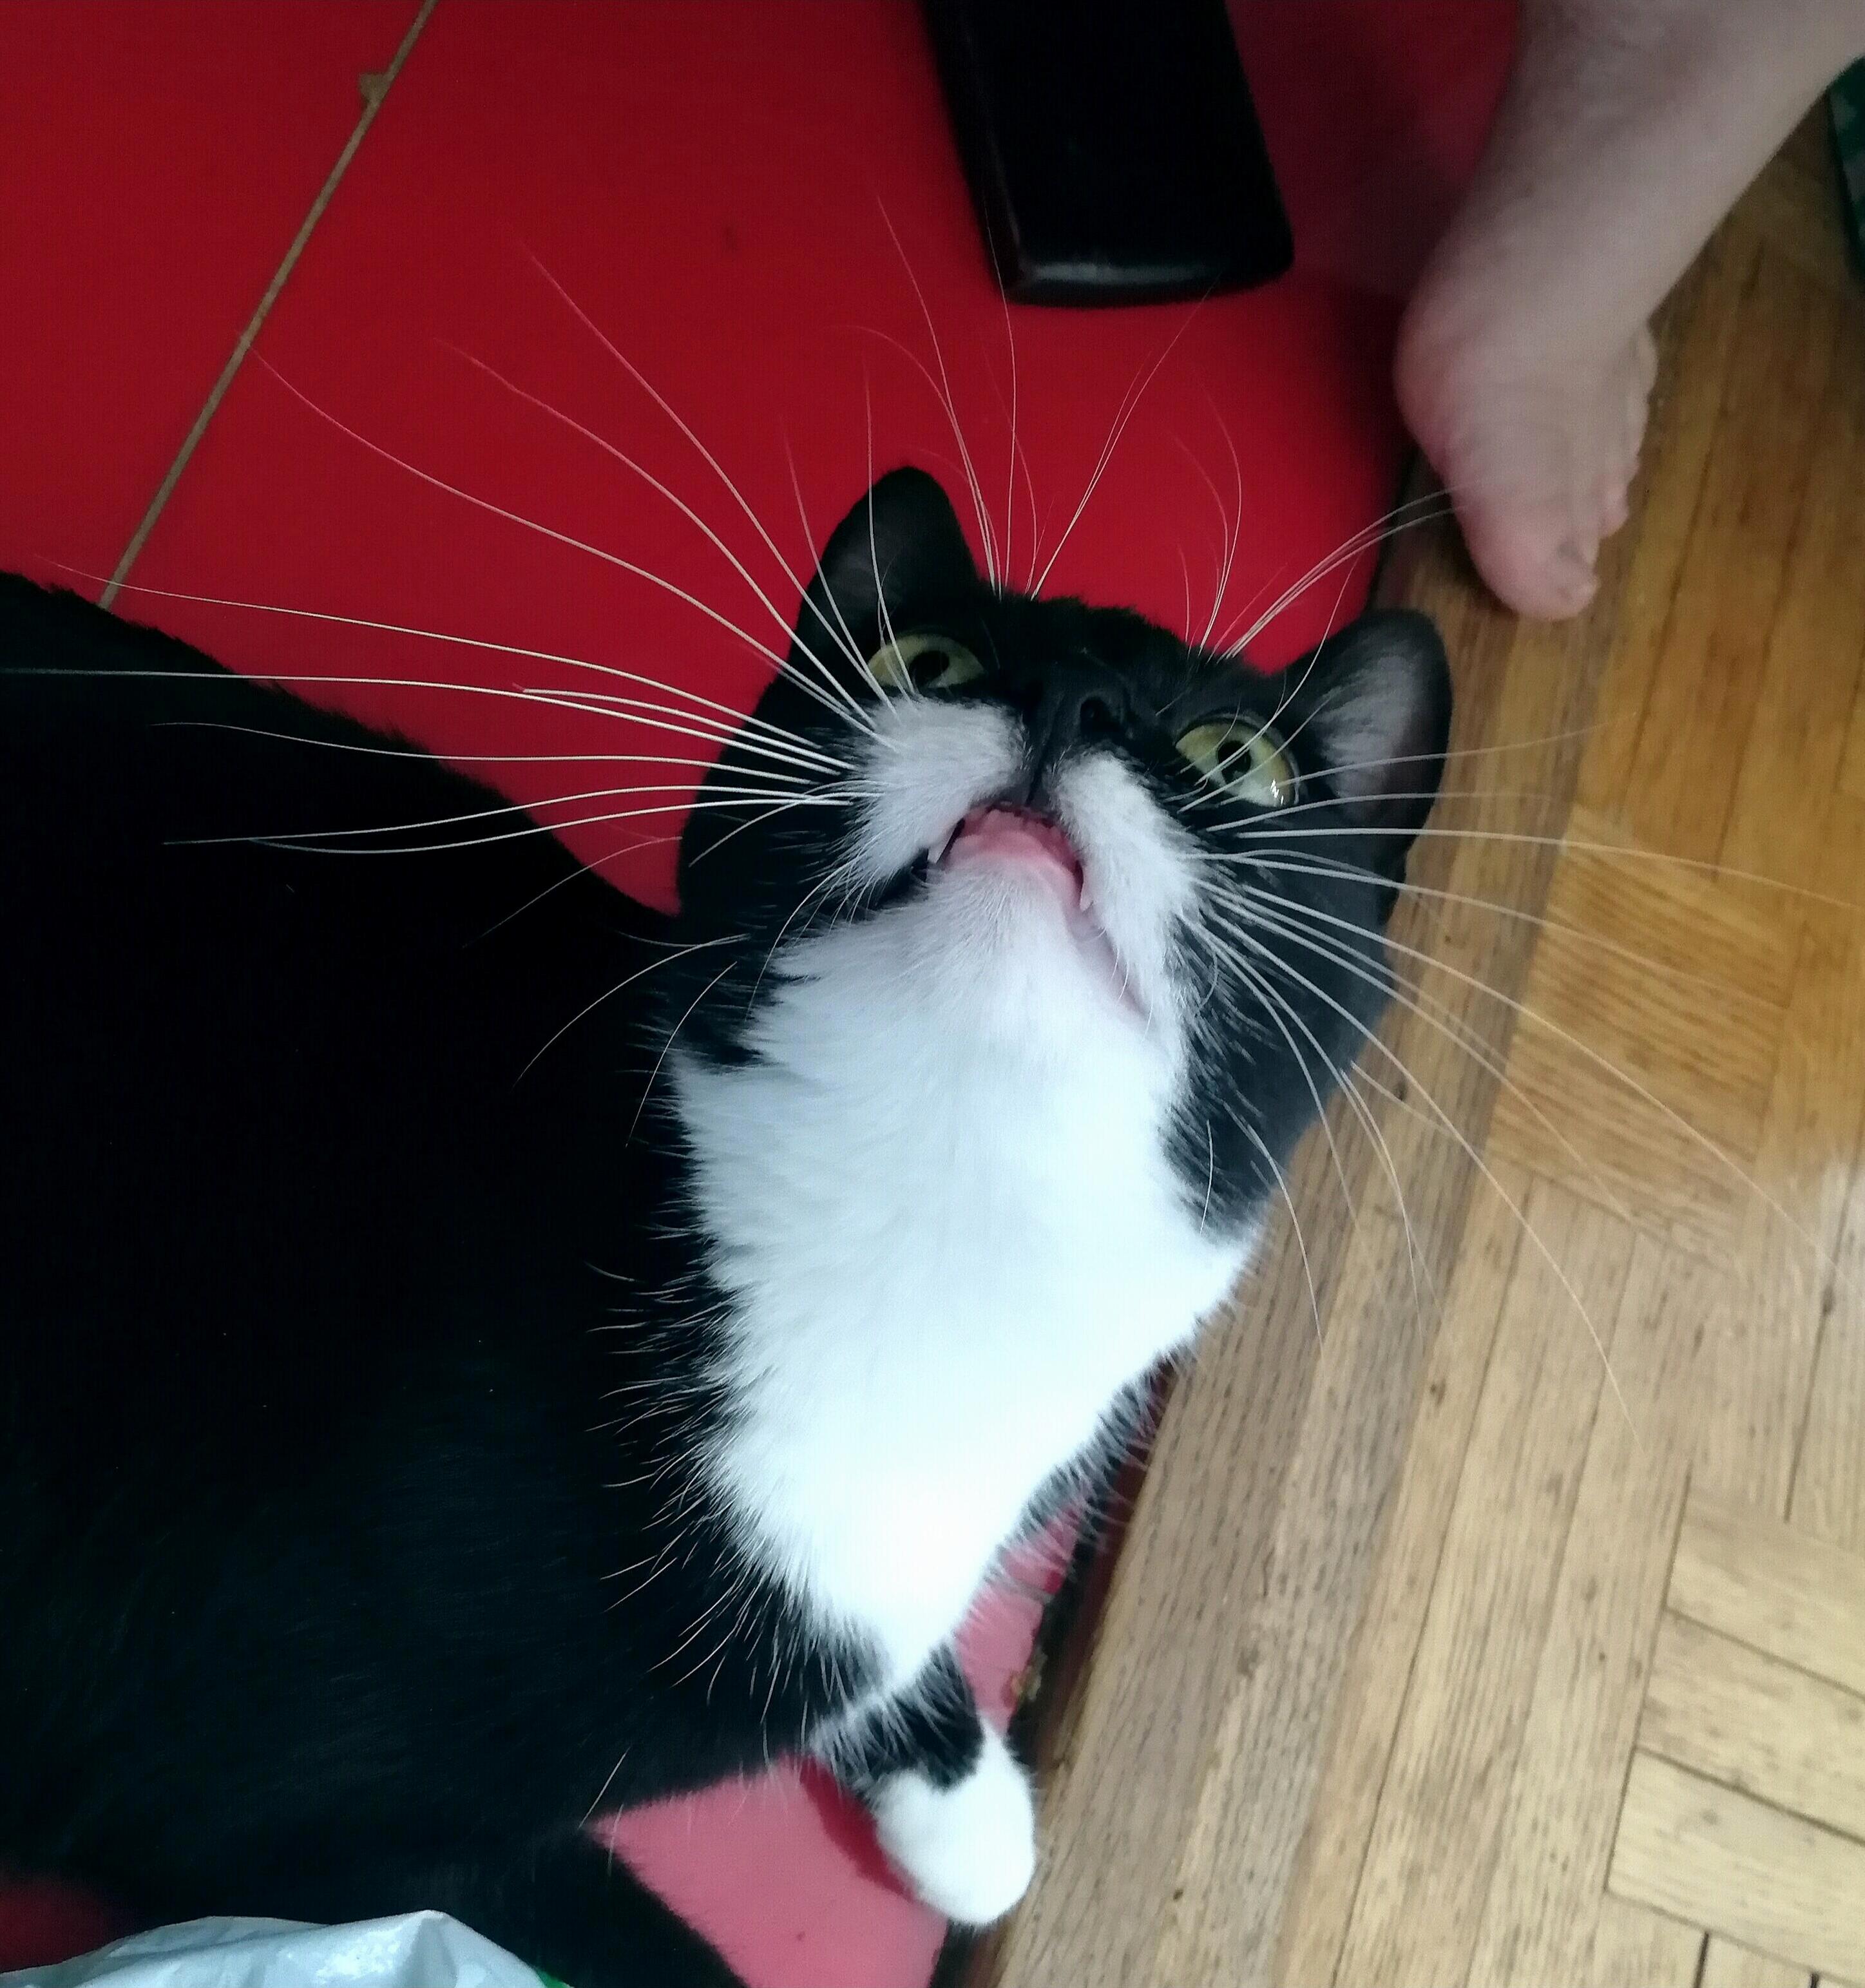 My feisty tuxedo gal has looong whiskers